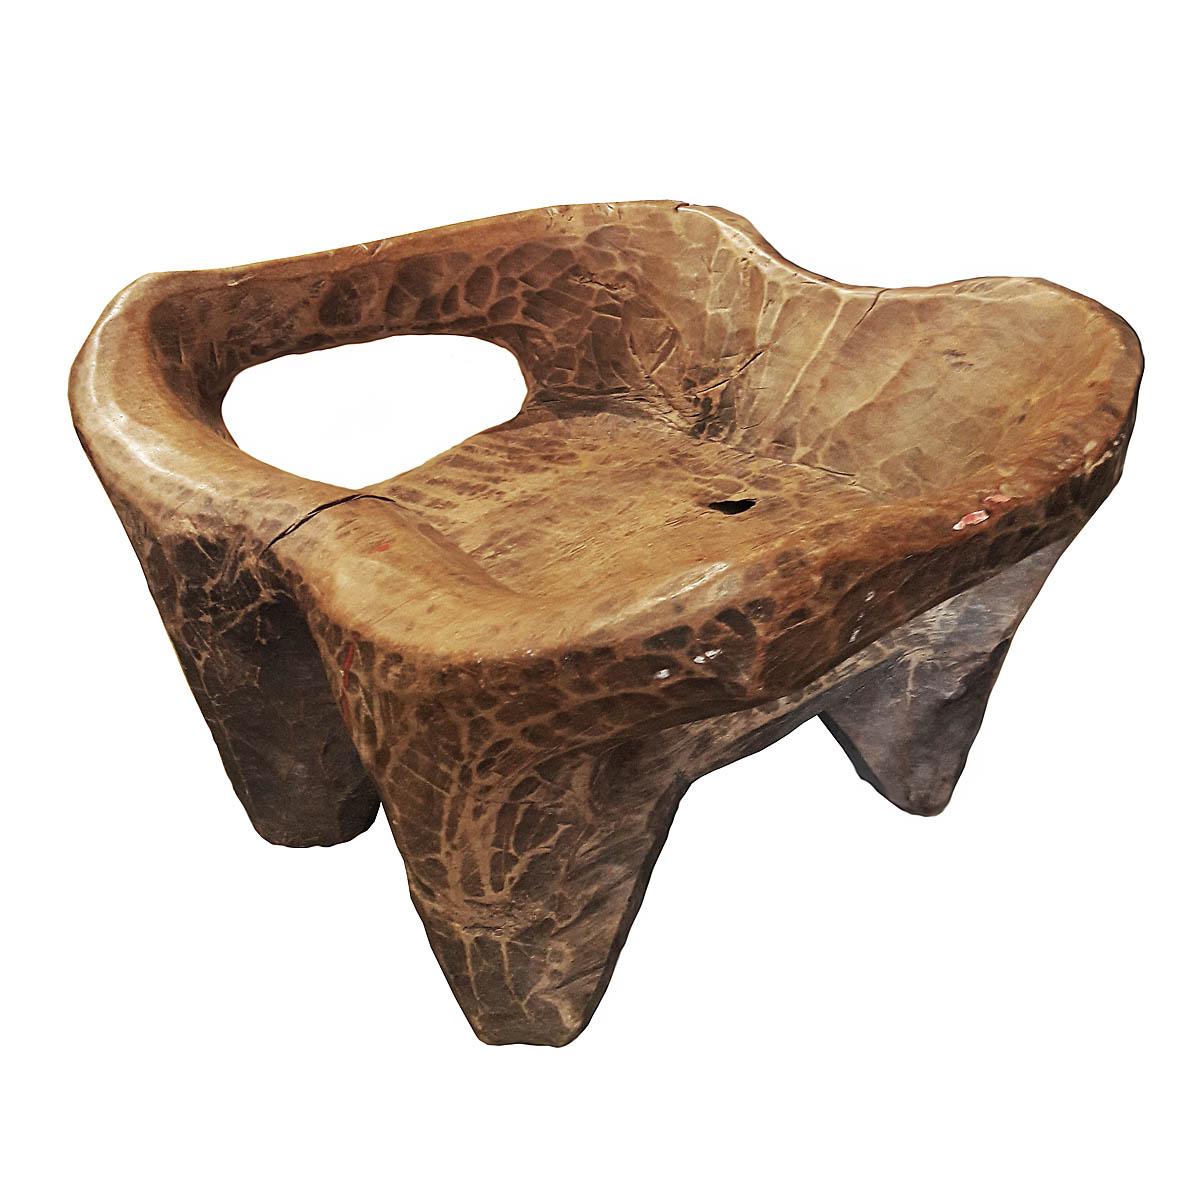 An Indonesian hand carved stool from a single piece of distressed teak wood, circa 1960. With four carved legs and curved arms. Use as a low side table or stand. A unique piece that will add an interesting accent to any eclectic decor.